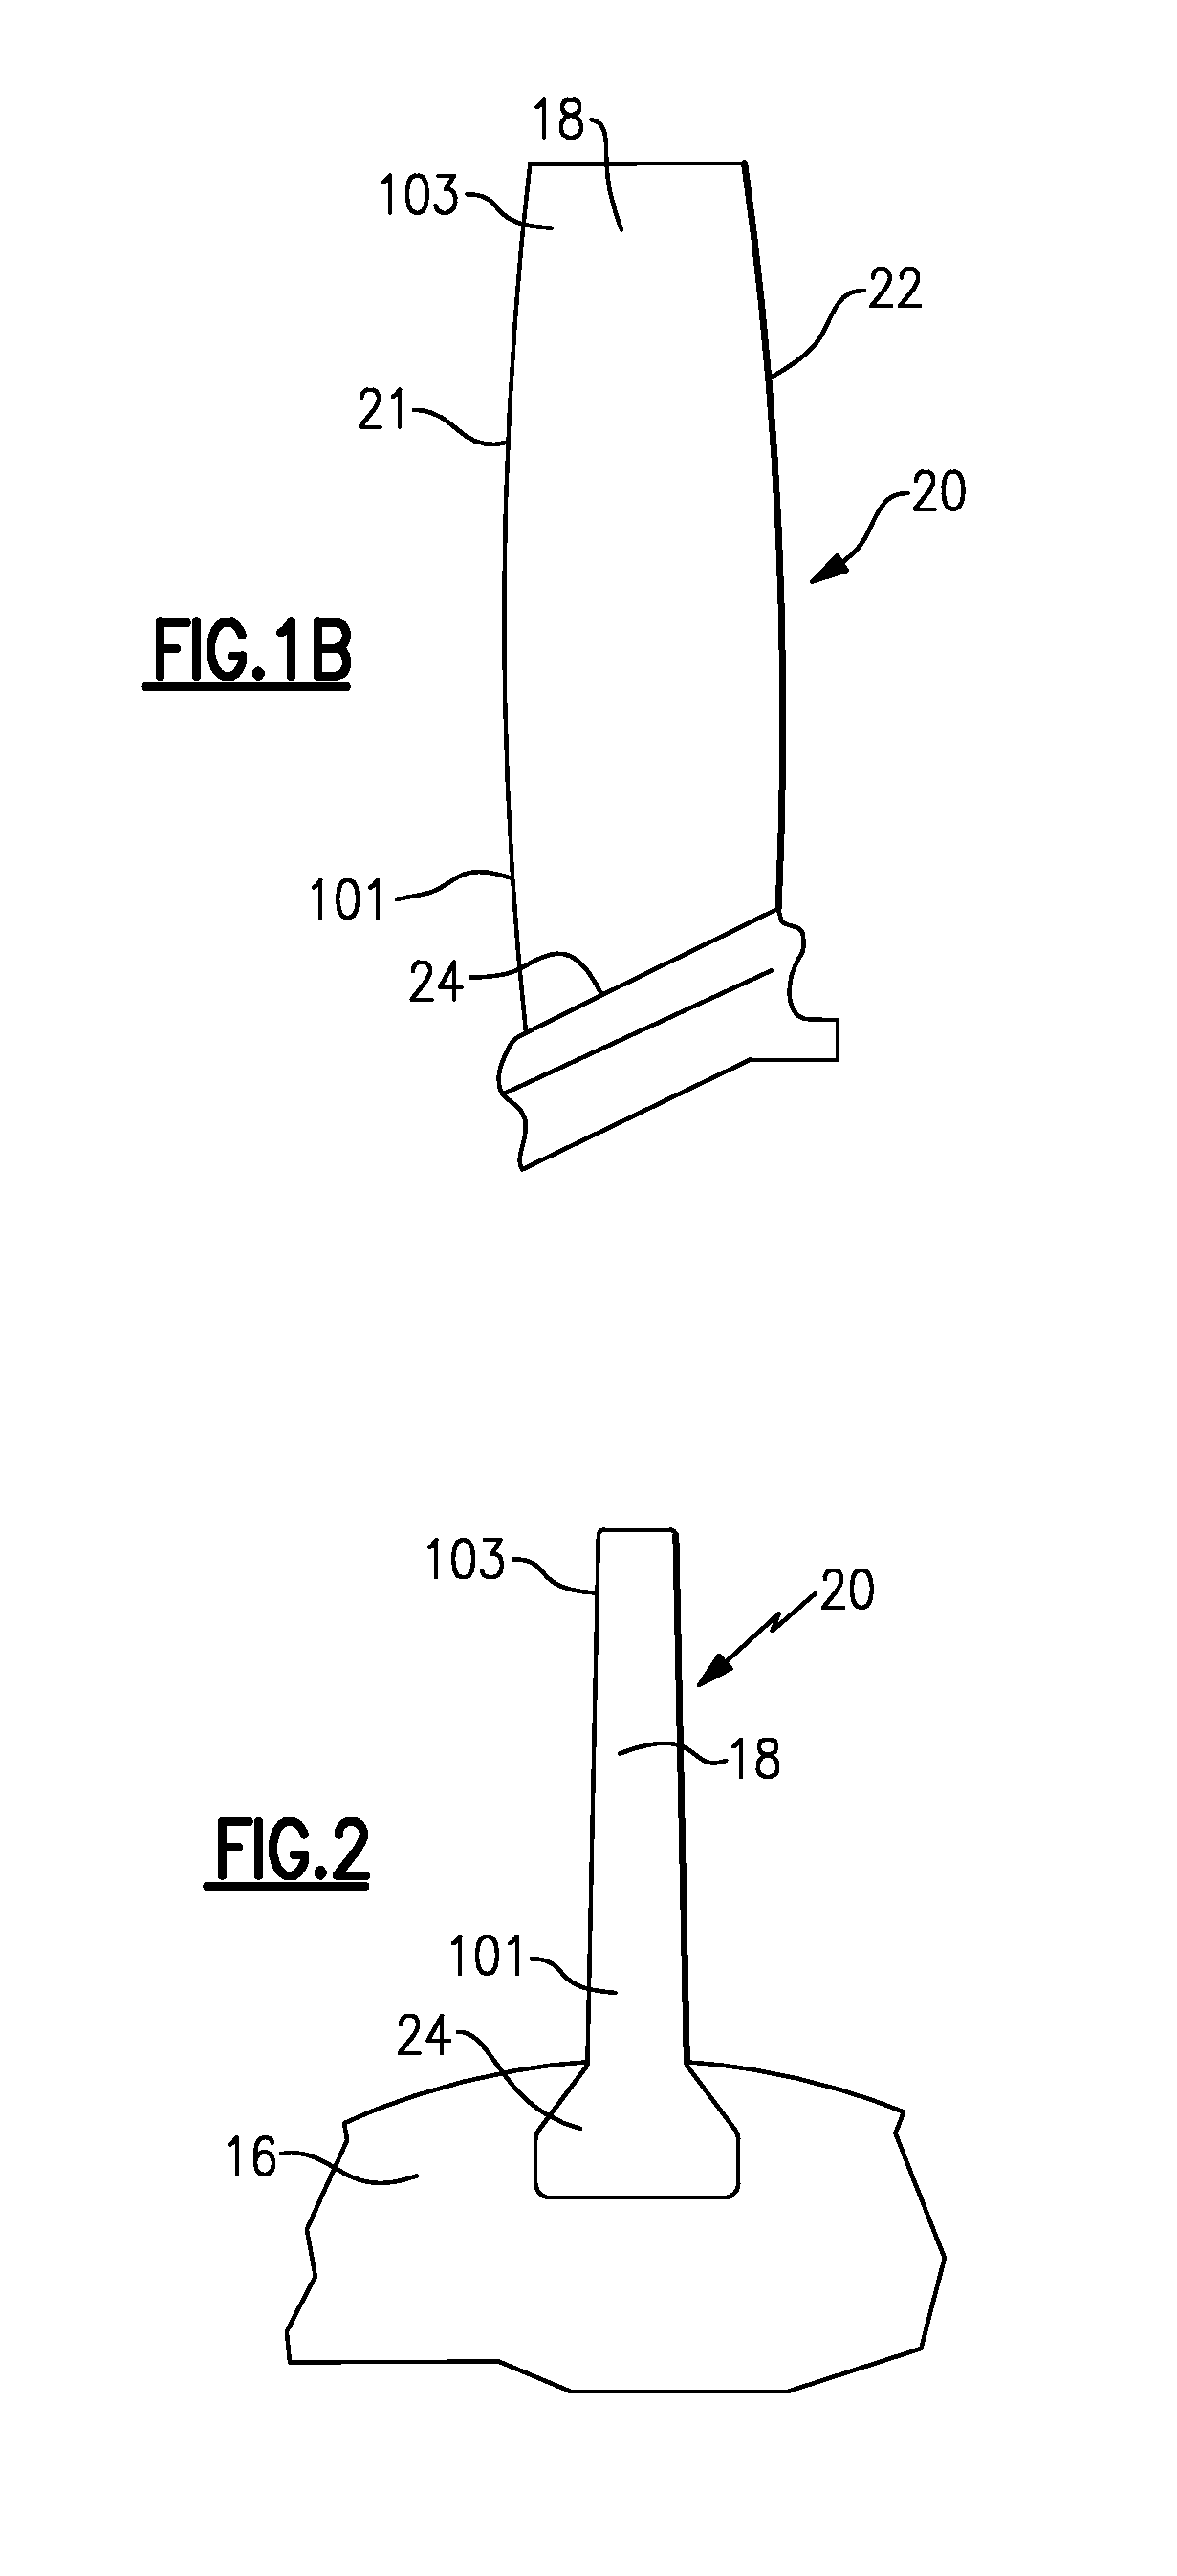 Hollow airfoil construction utilizing functionally graded materials